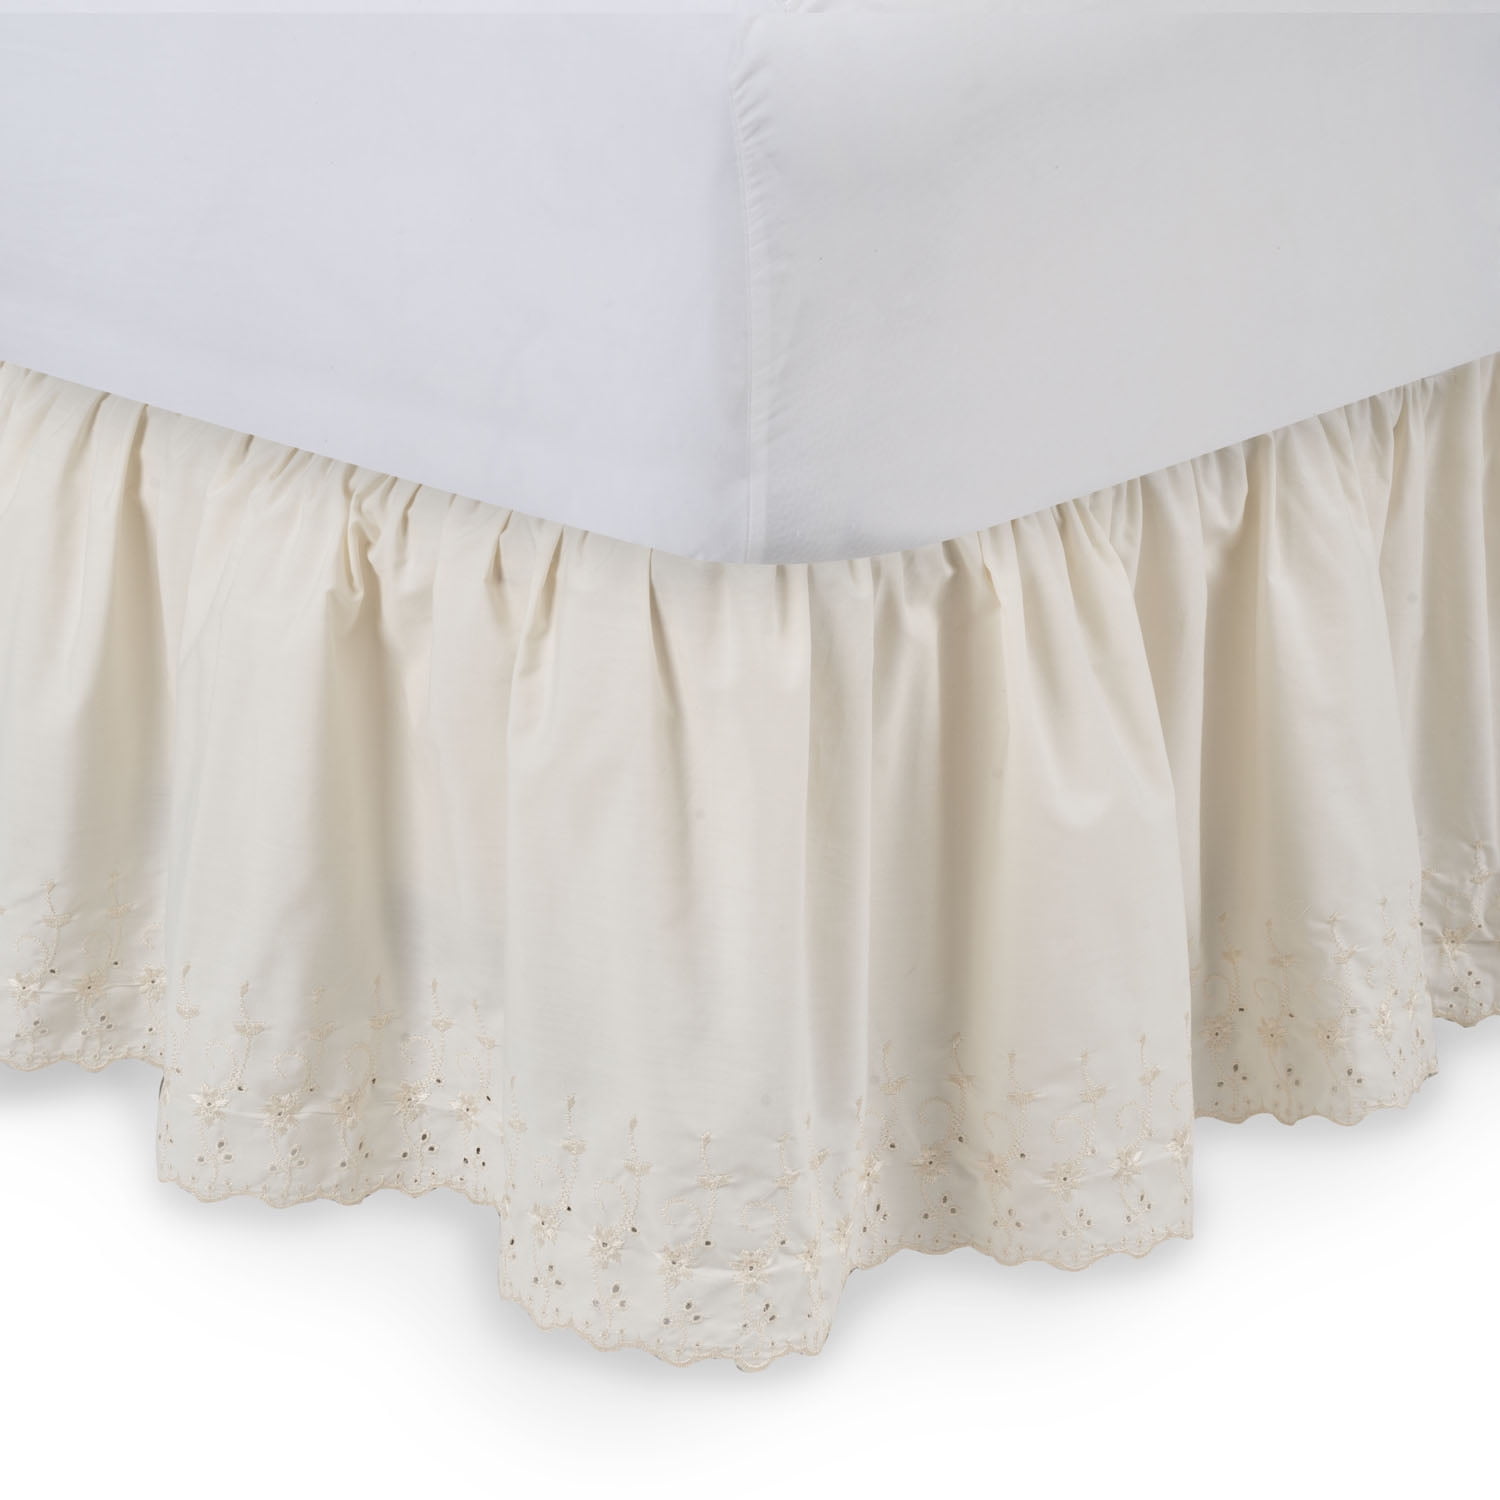 14" DROP WRAP AROUND EYELET LACE BED SKIRT DUST RUFFLE 